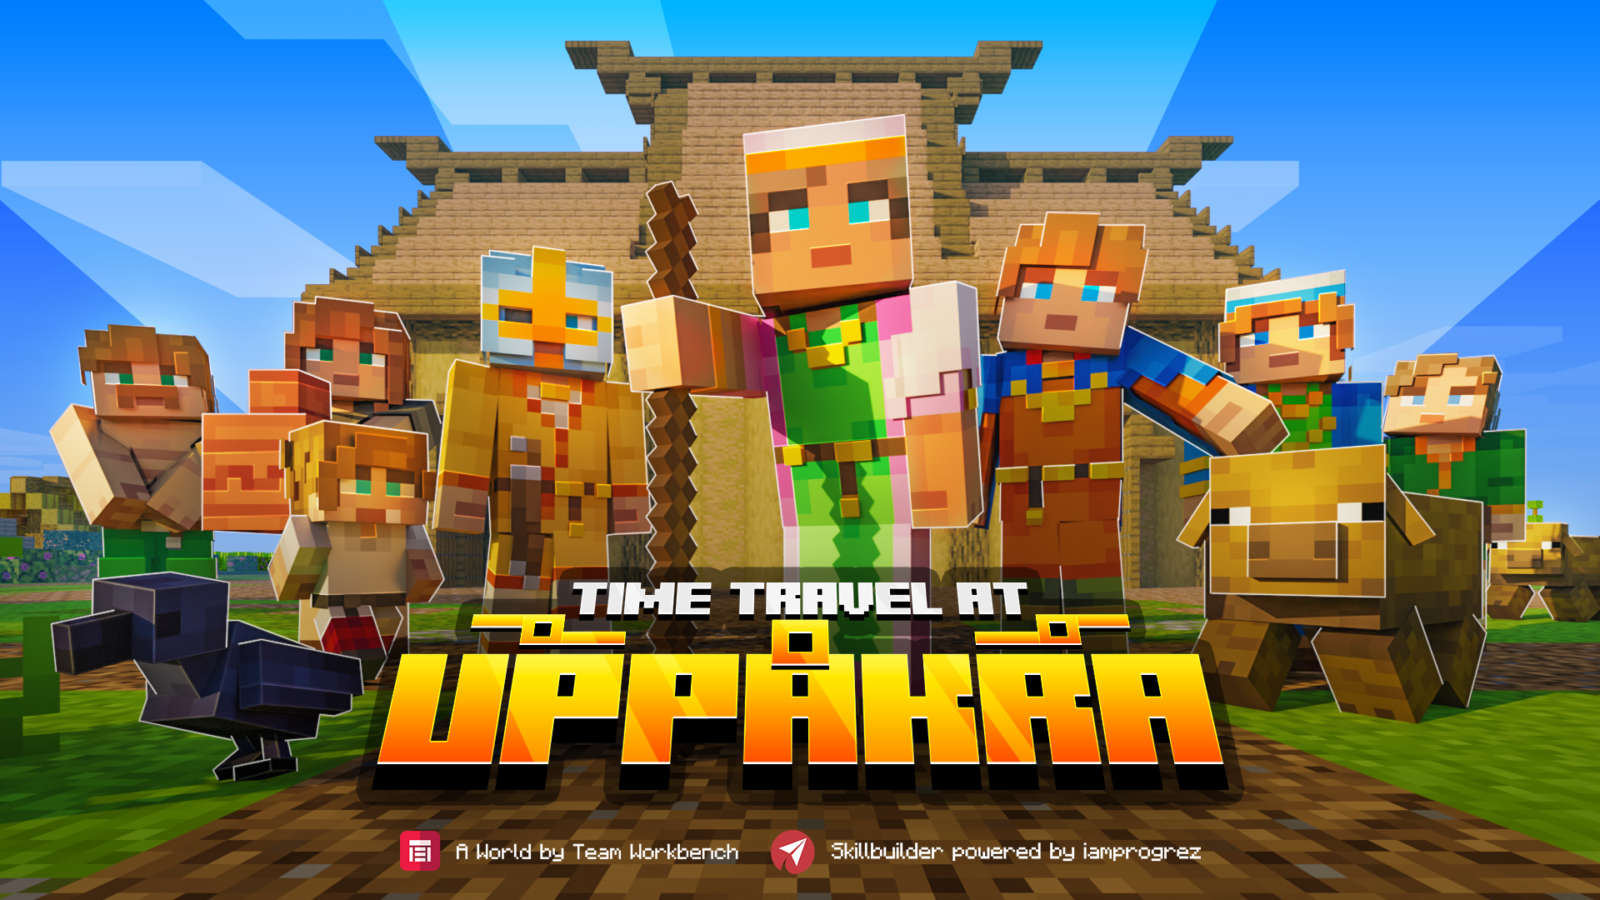 Time travel at Uppakra Minecraft screen capture